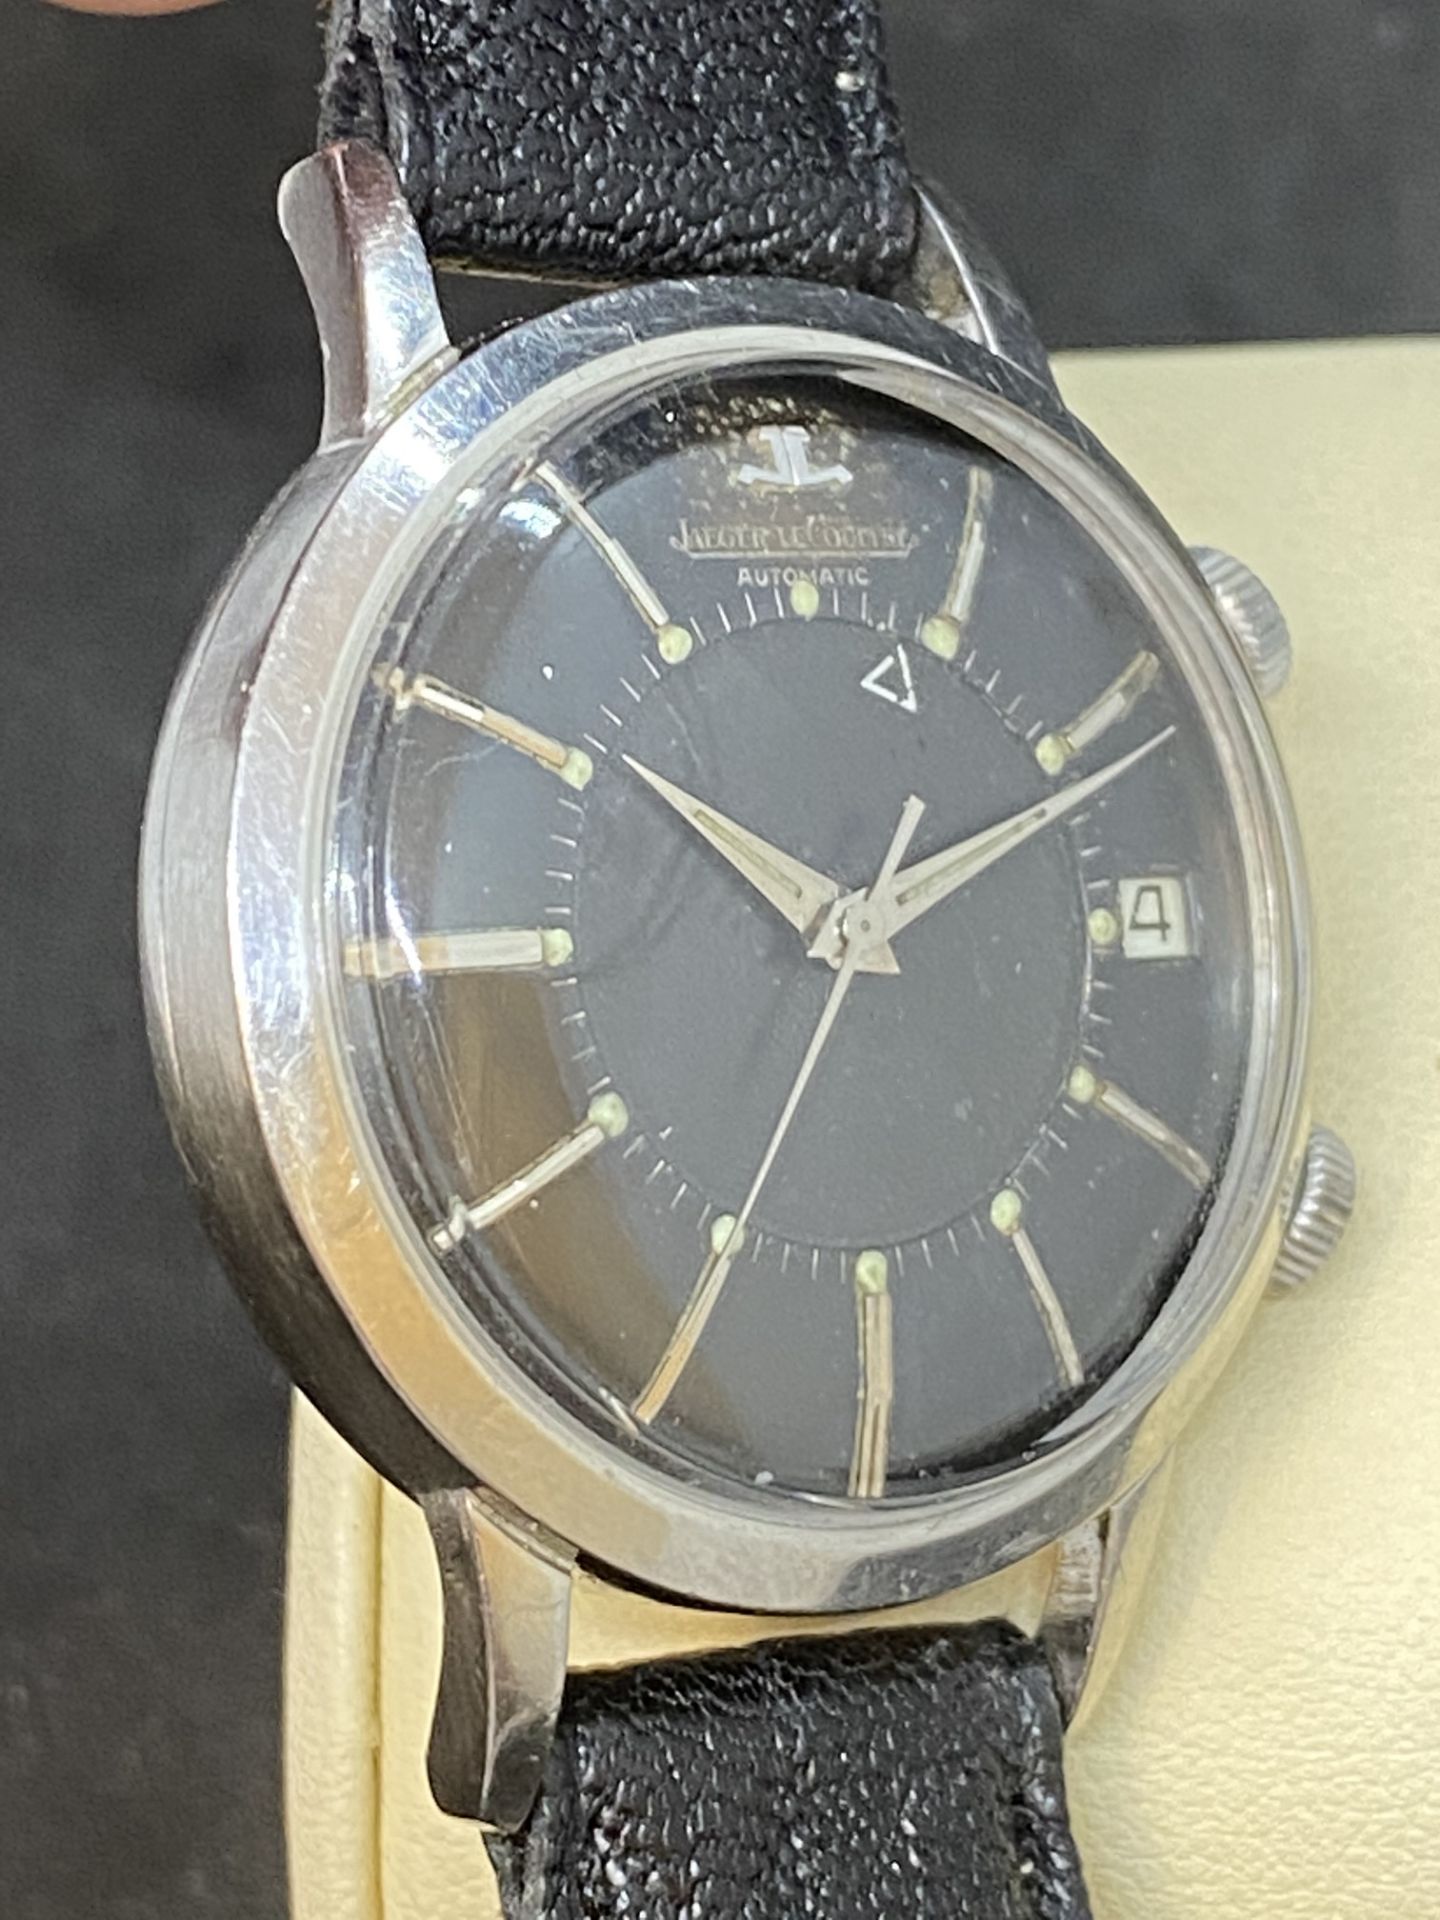 JAEGER LECOULTRE VINTAGE WATCH - Image 6 of 9